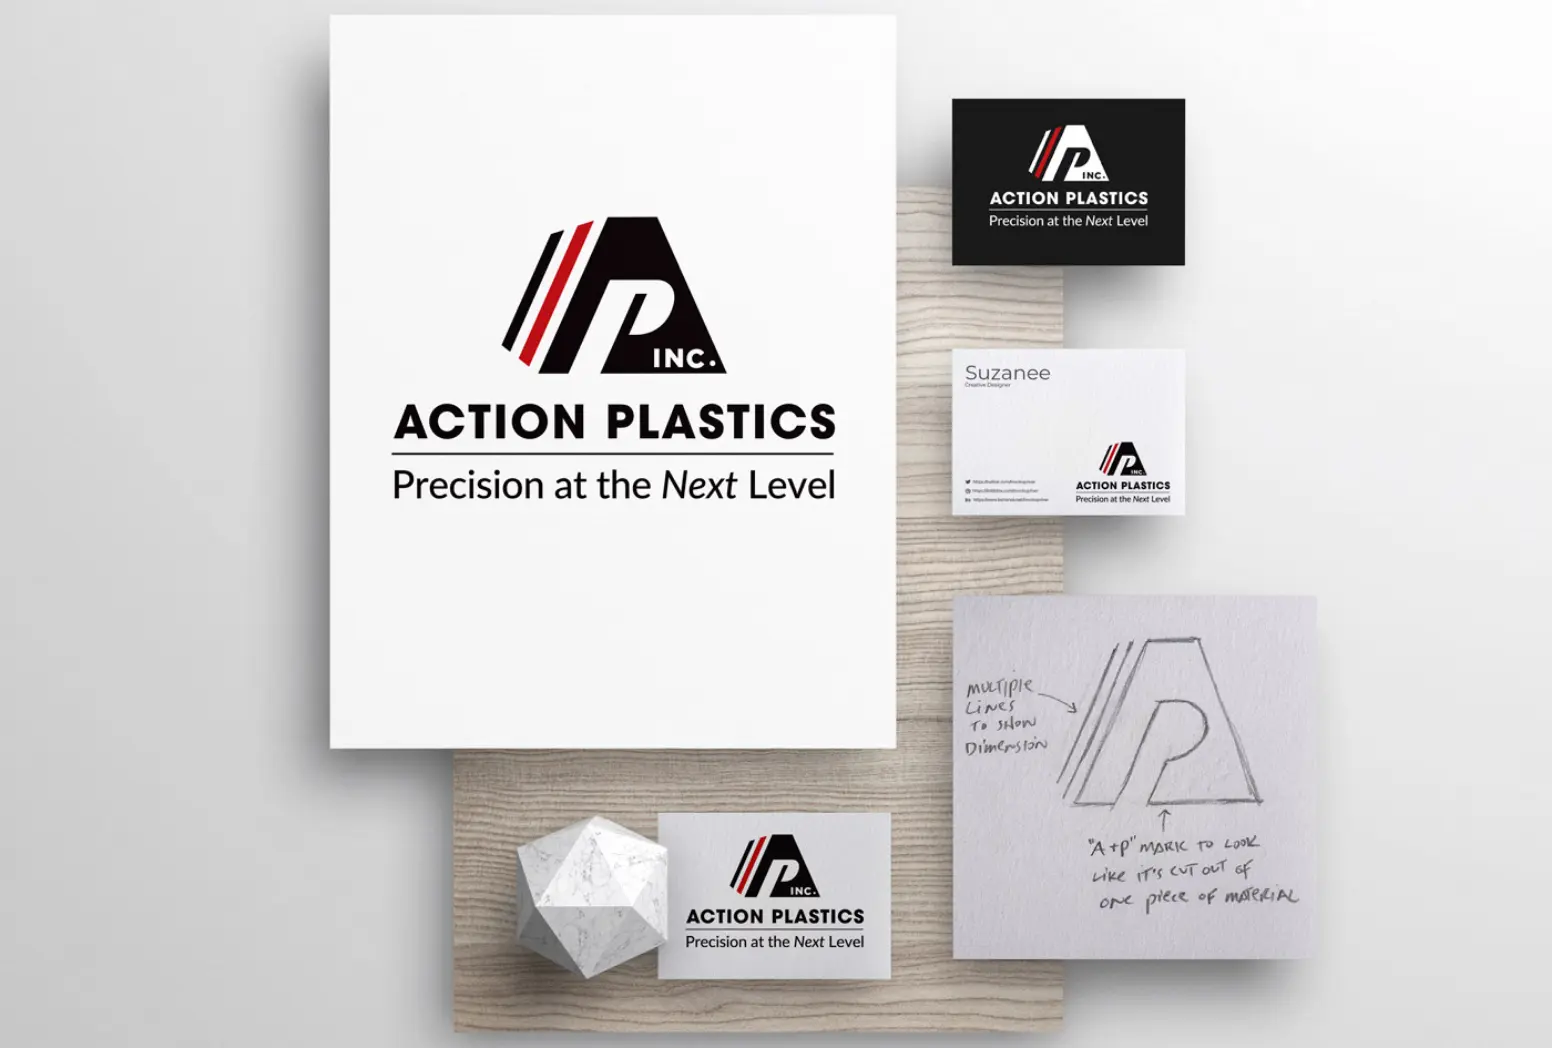 Pencil sketch and finished variations of the new logo we designed for Action Plastics.